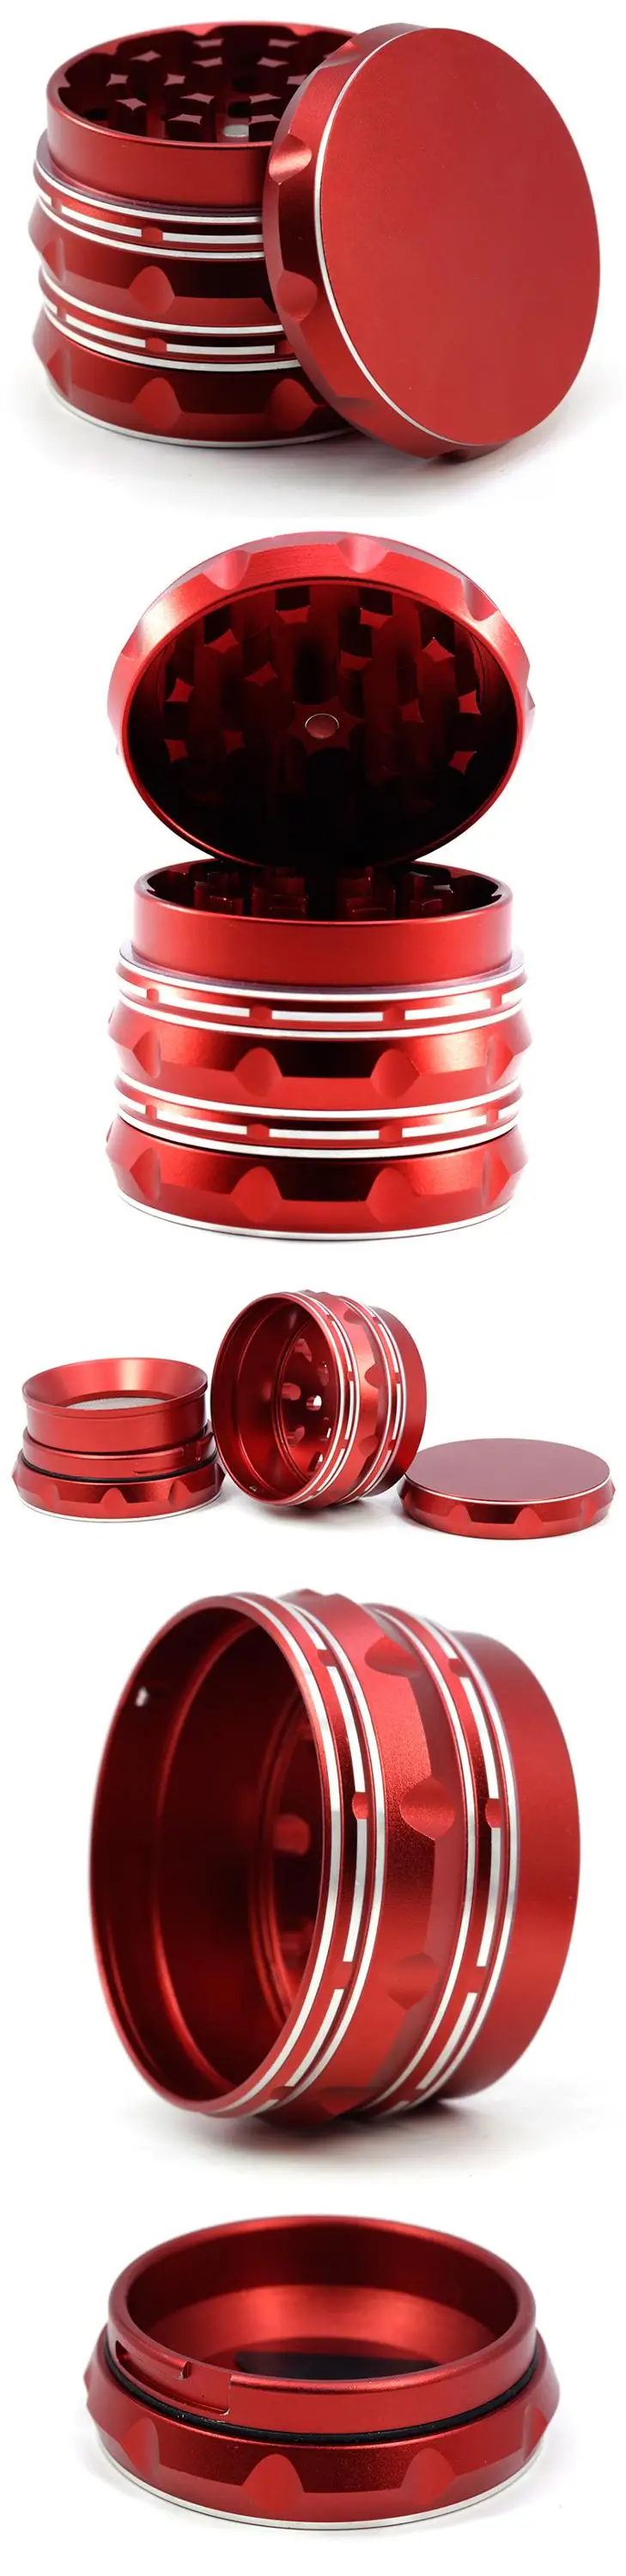 NEW STYLE FASTER LOCKED 4 PARTS INNER SCREEN DIAMETER 63MM ALUMINIUM ALLOY HERB GRINDER TOBACCO CRUSHER